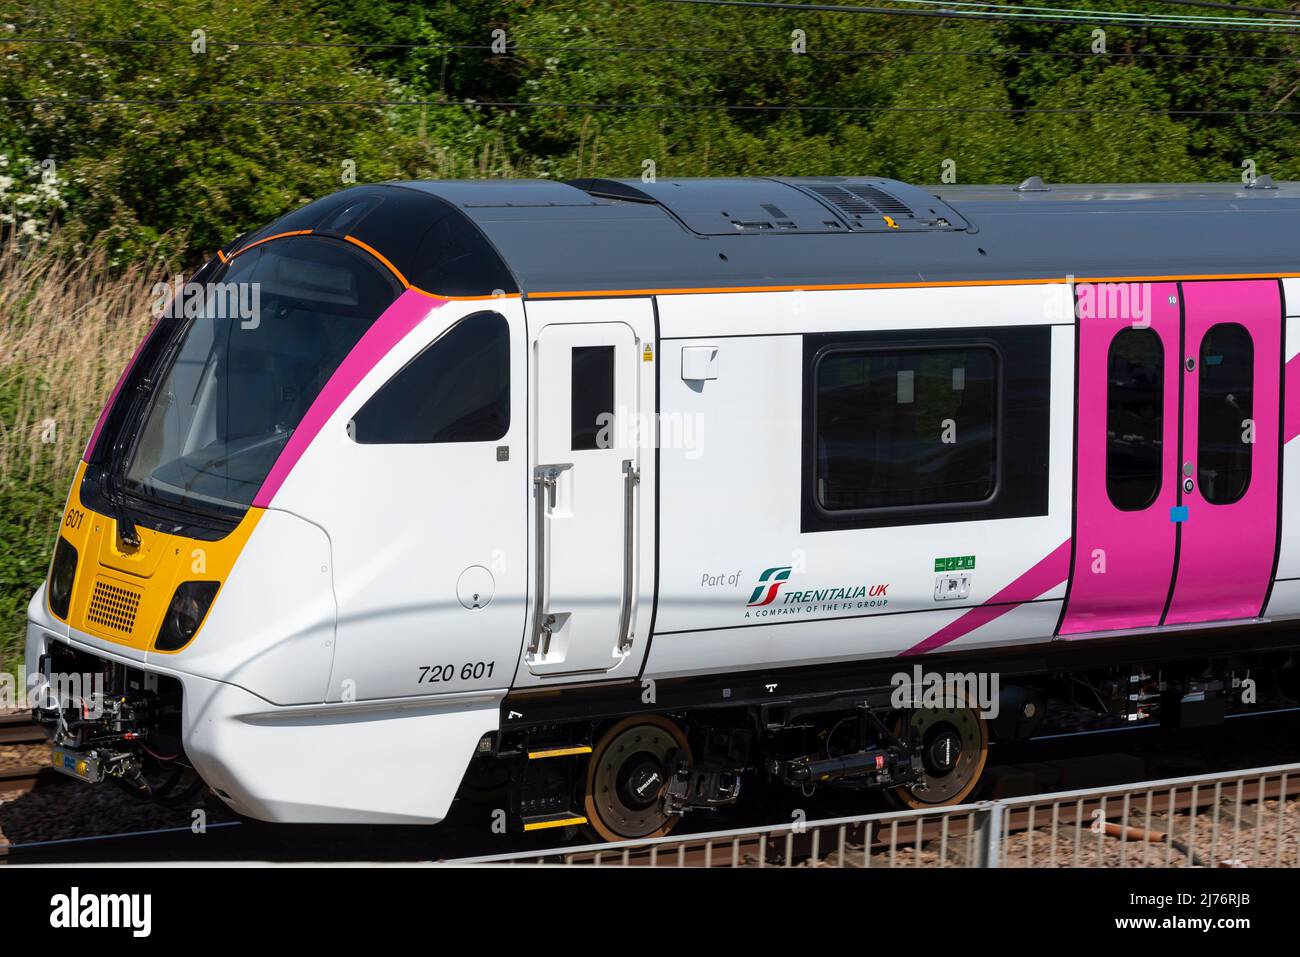 New C2C Class 720 train on a test run at Chalkwell, Southend on Sea, Essex, UK. Electrified London Southend Railway operated by Trenitalia Stock Photo